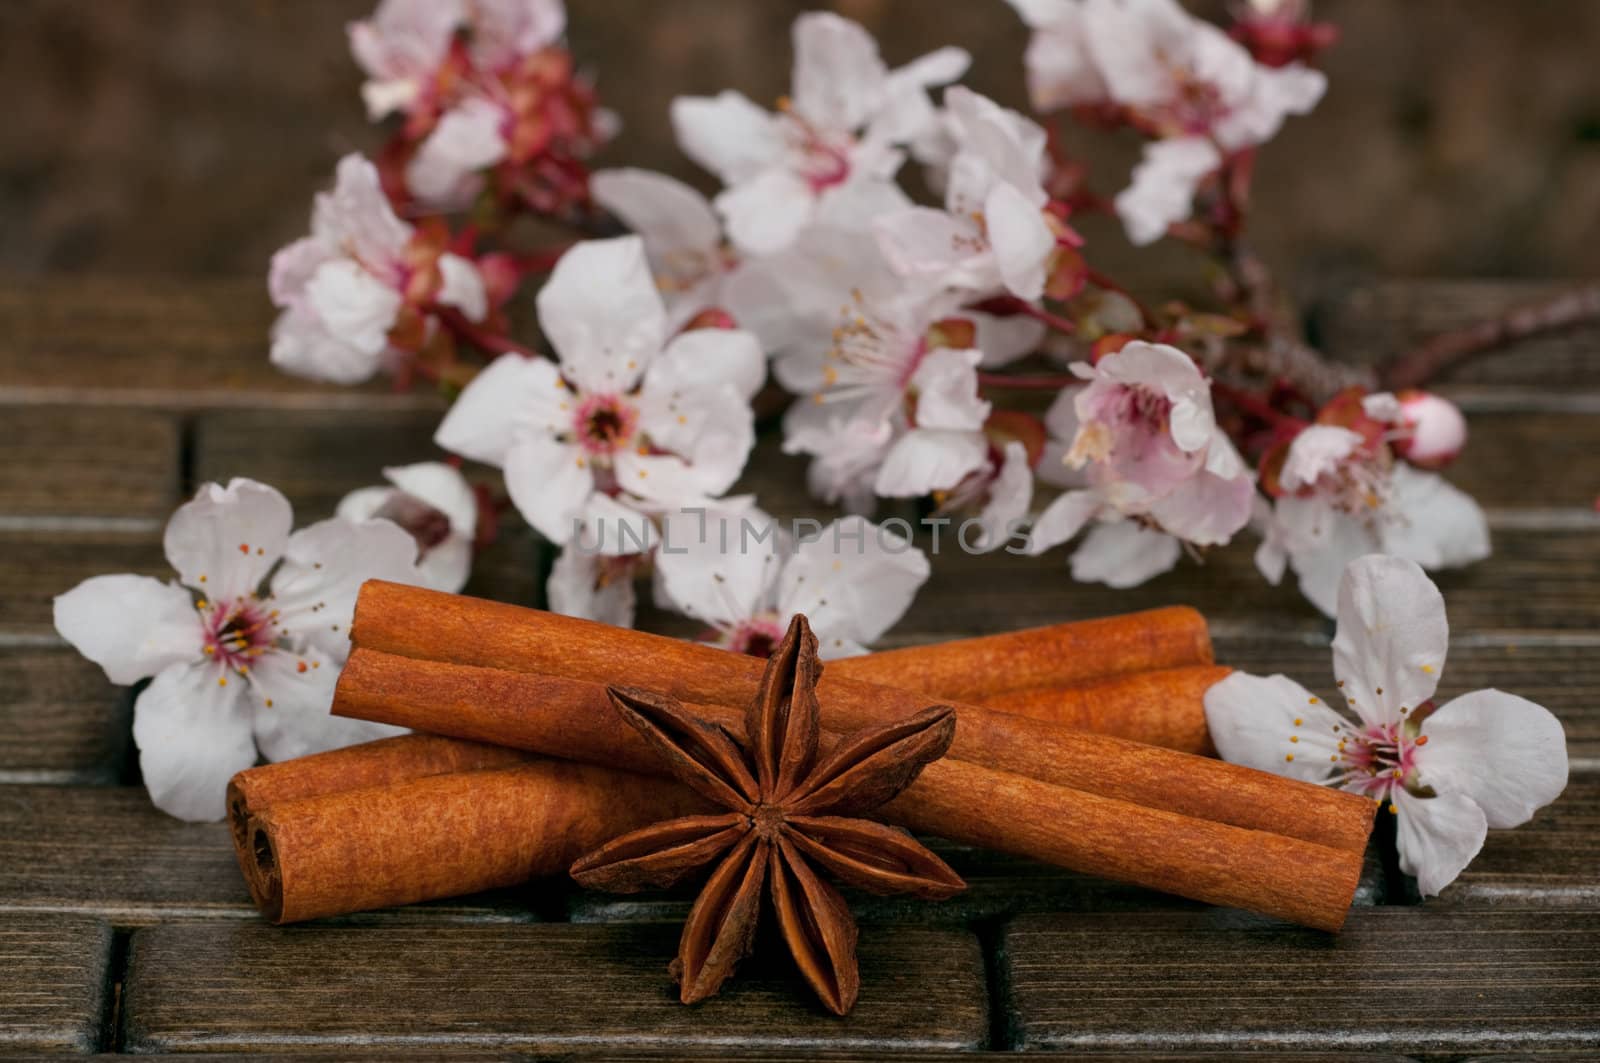 Aromatic spices, anise and cinnamon sticks with cherry blossoms